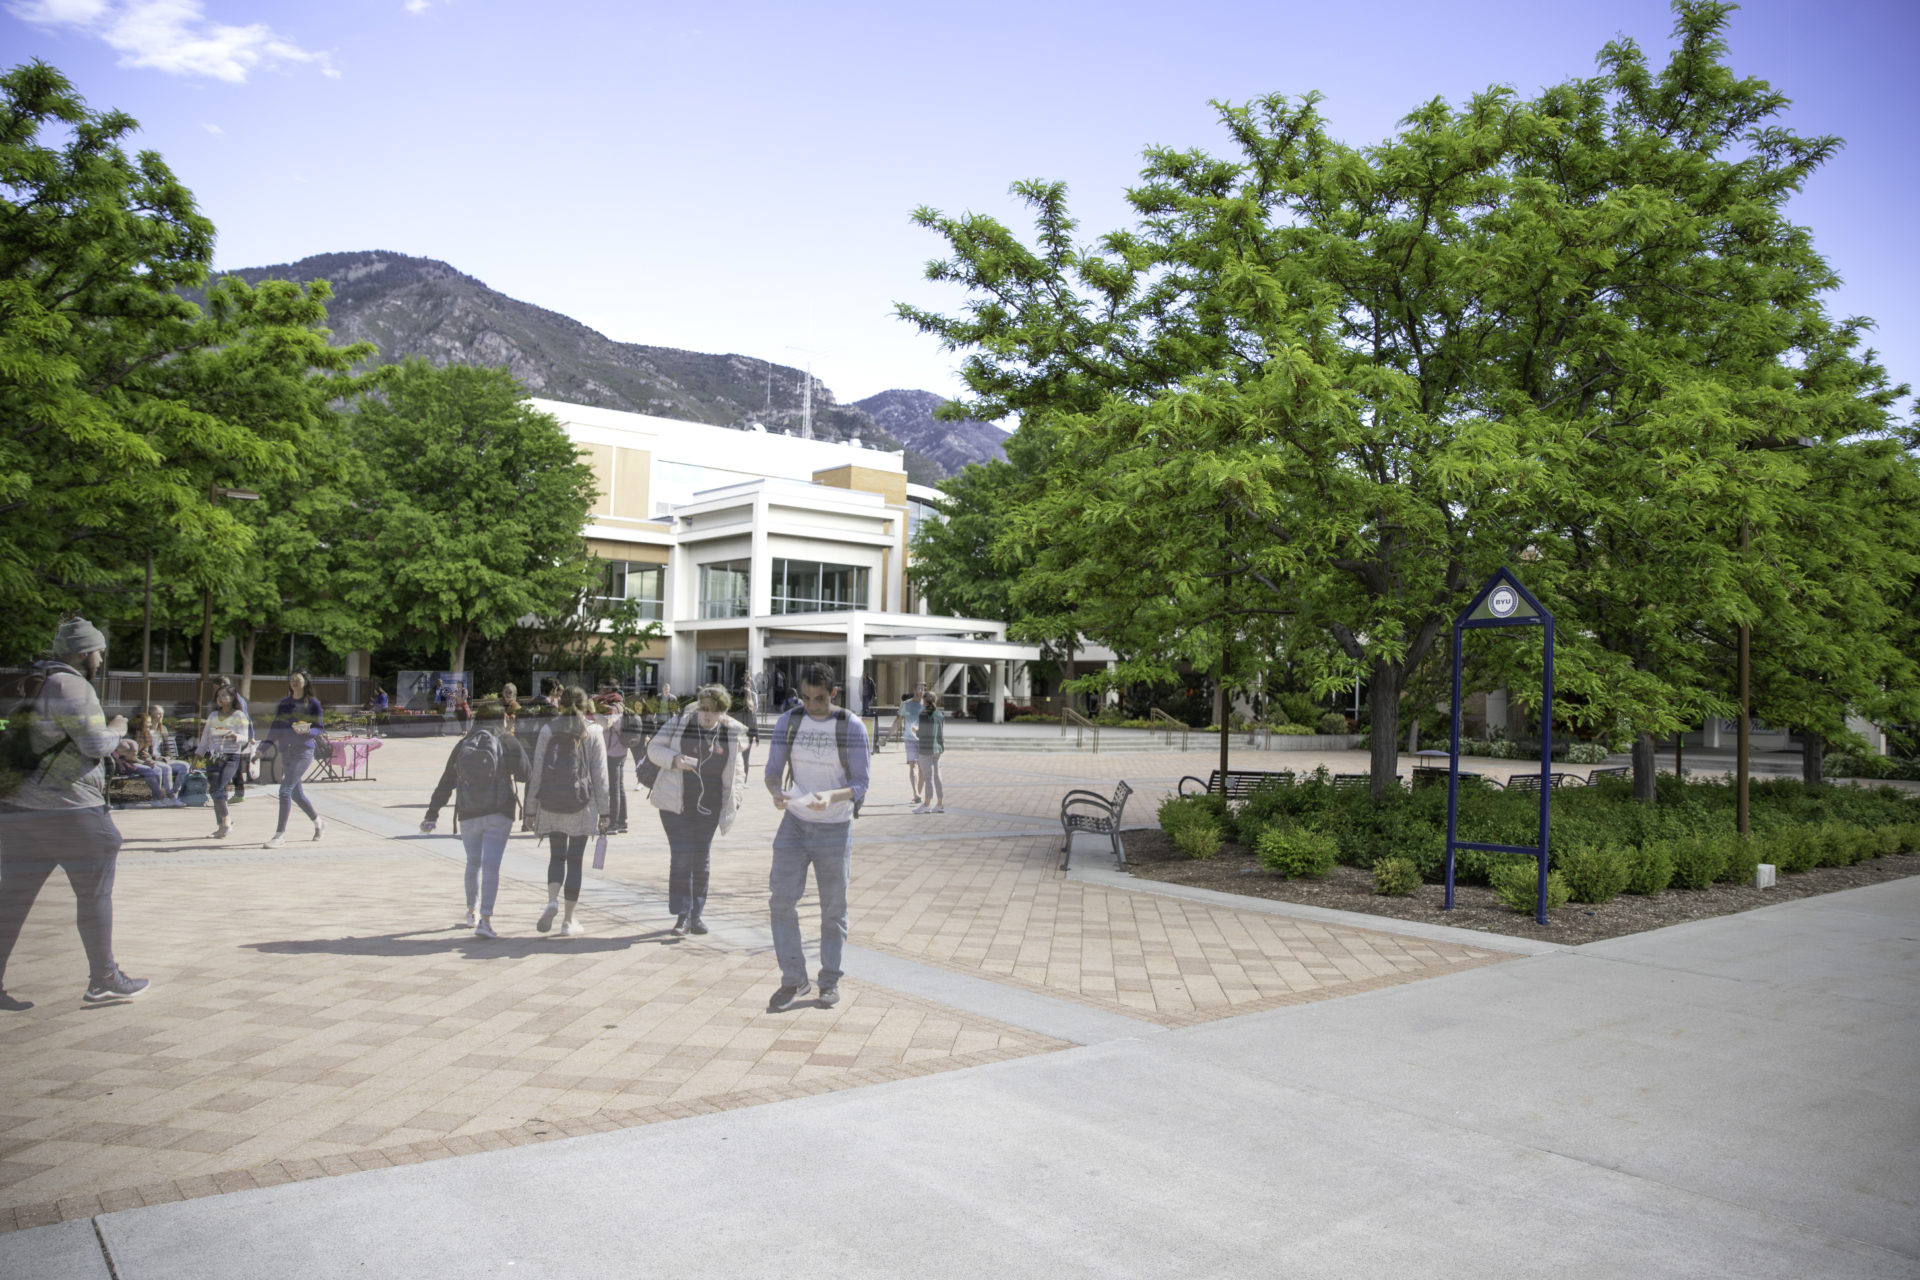 BYU students split over whether to enroll for Fall Semester if classes